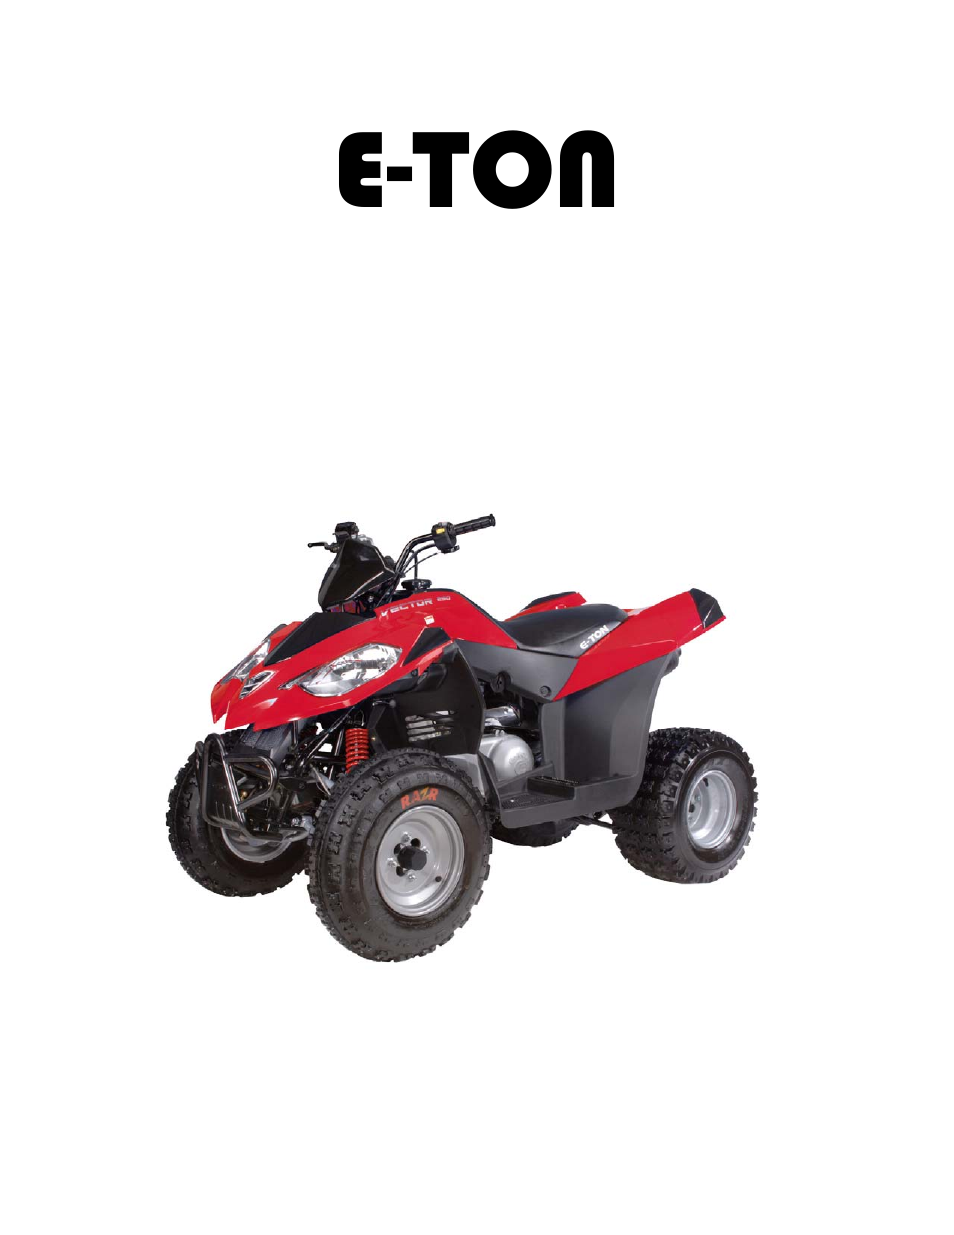 Eton VECTOR 250R User Manual | 32 pages